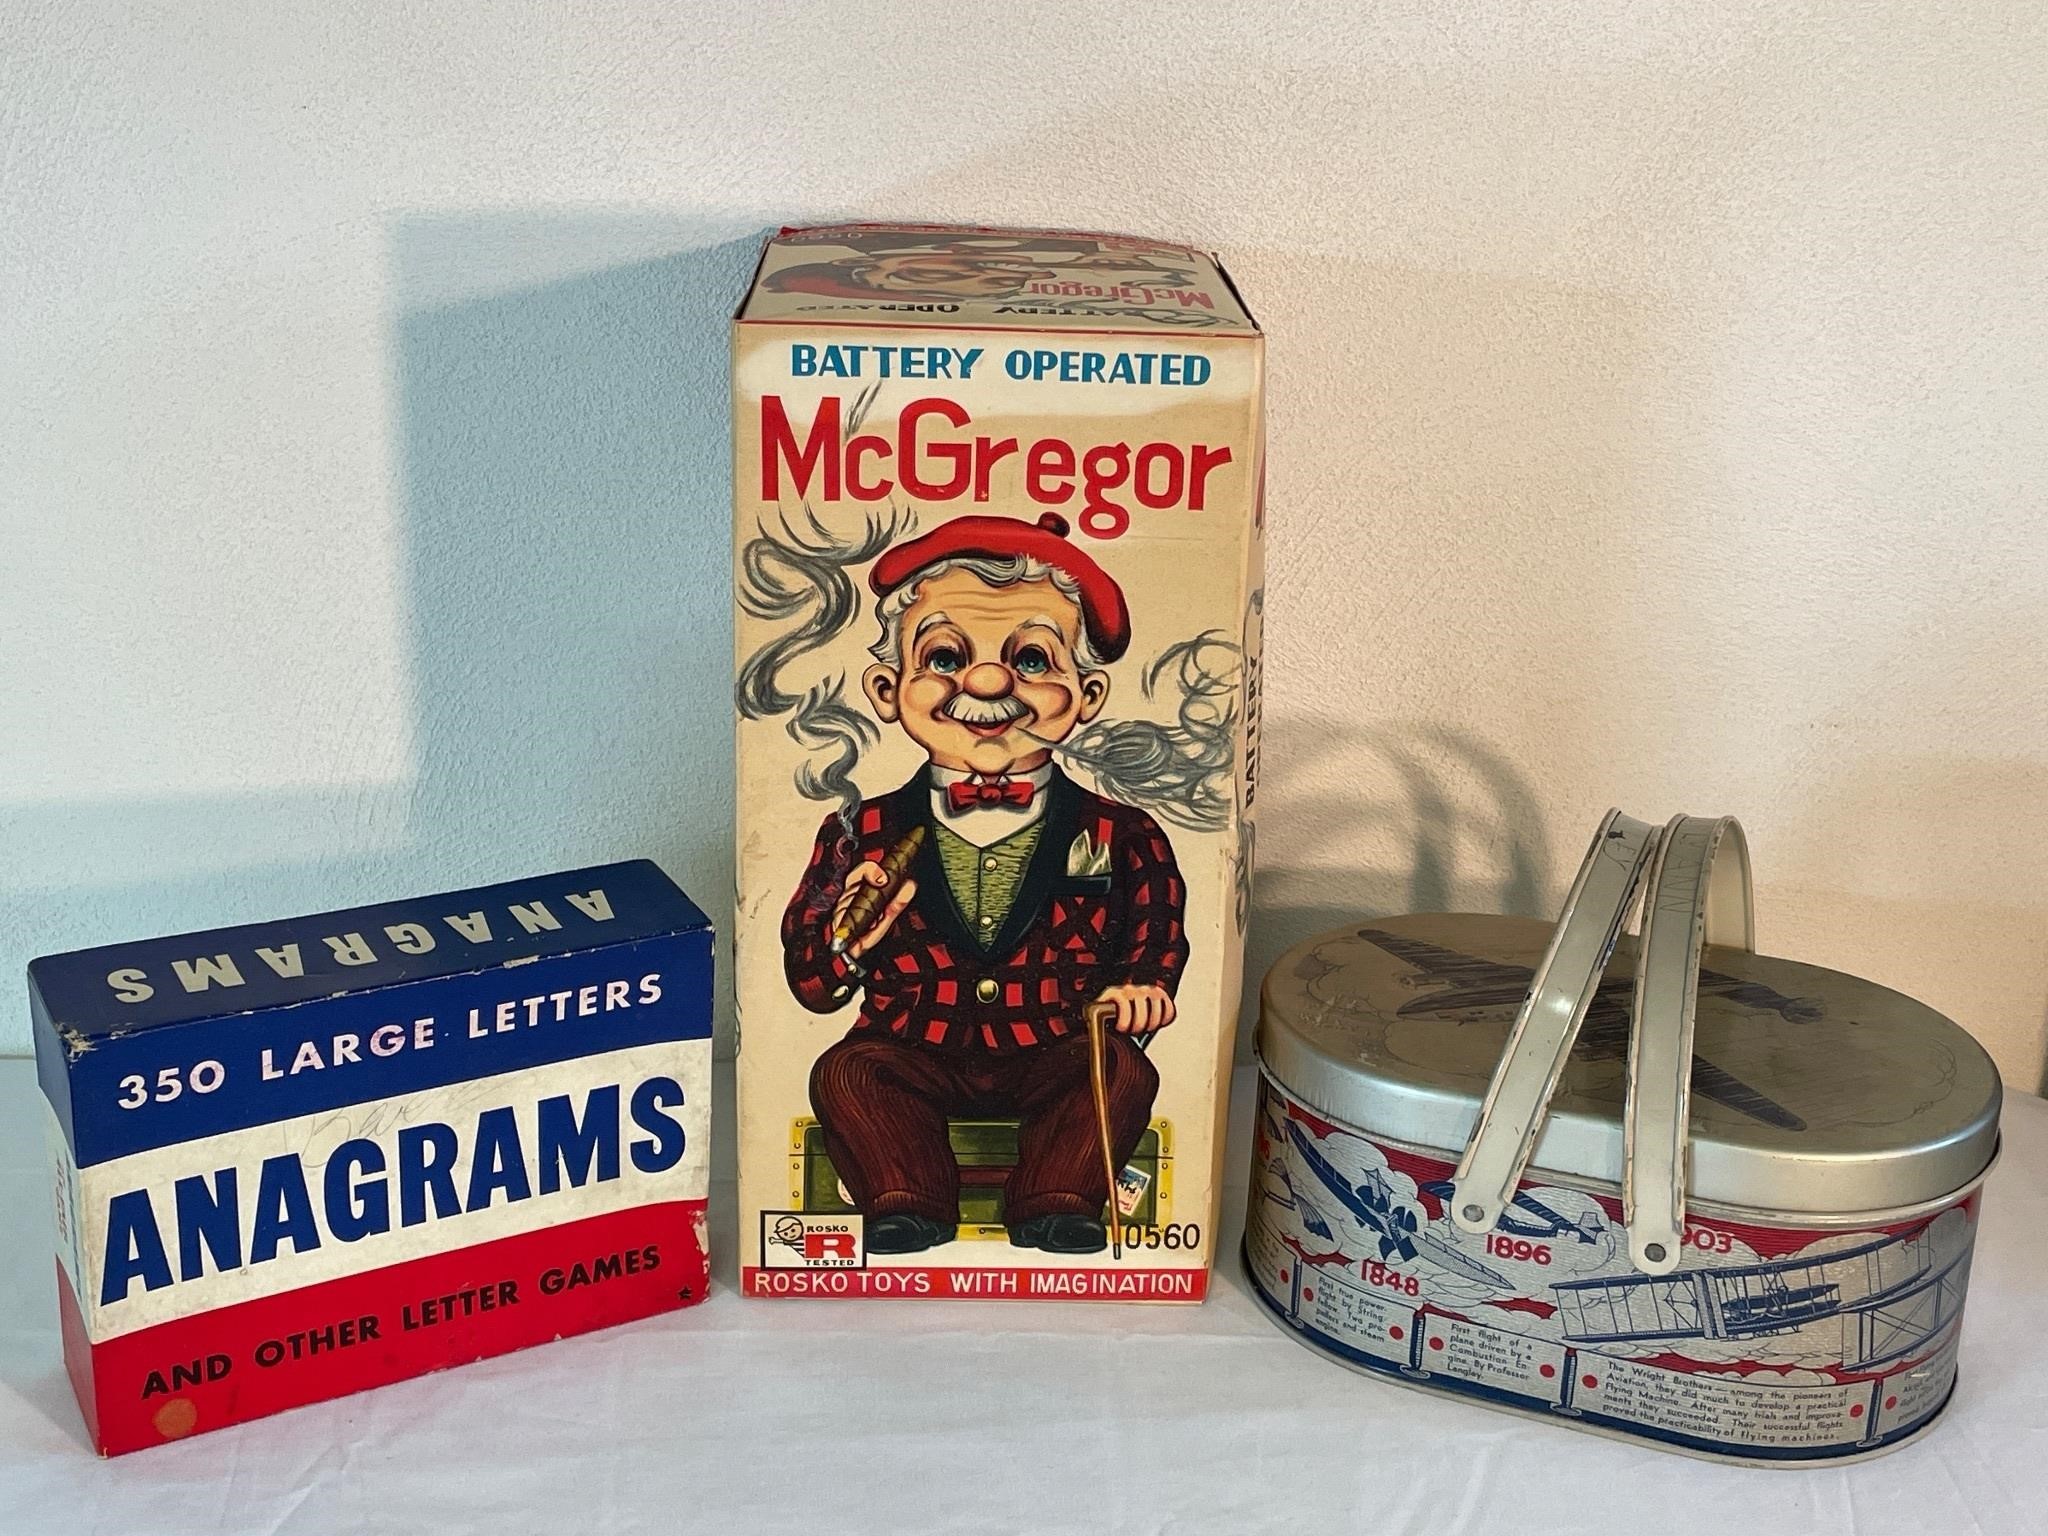 Antique toy, game, and tin